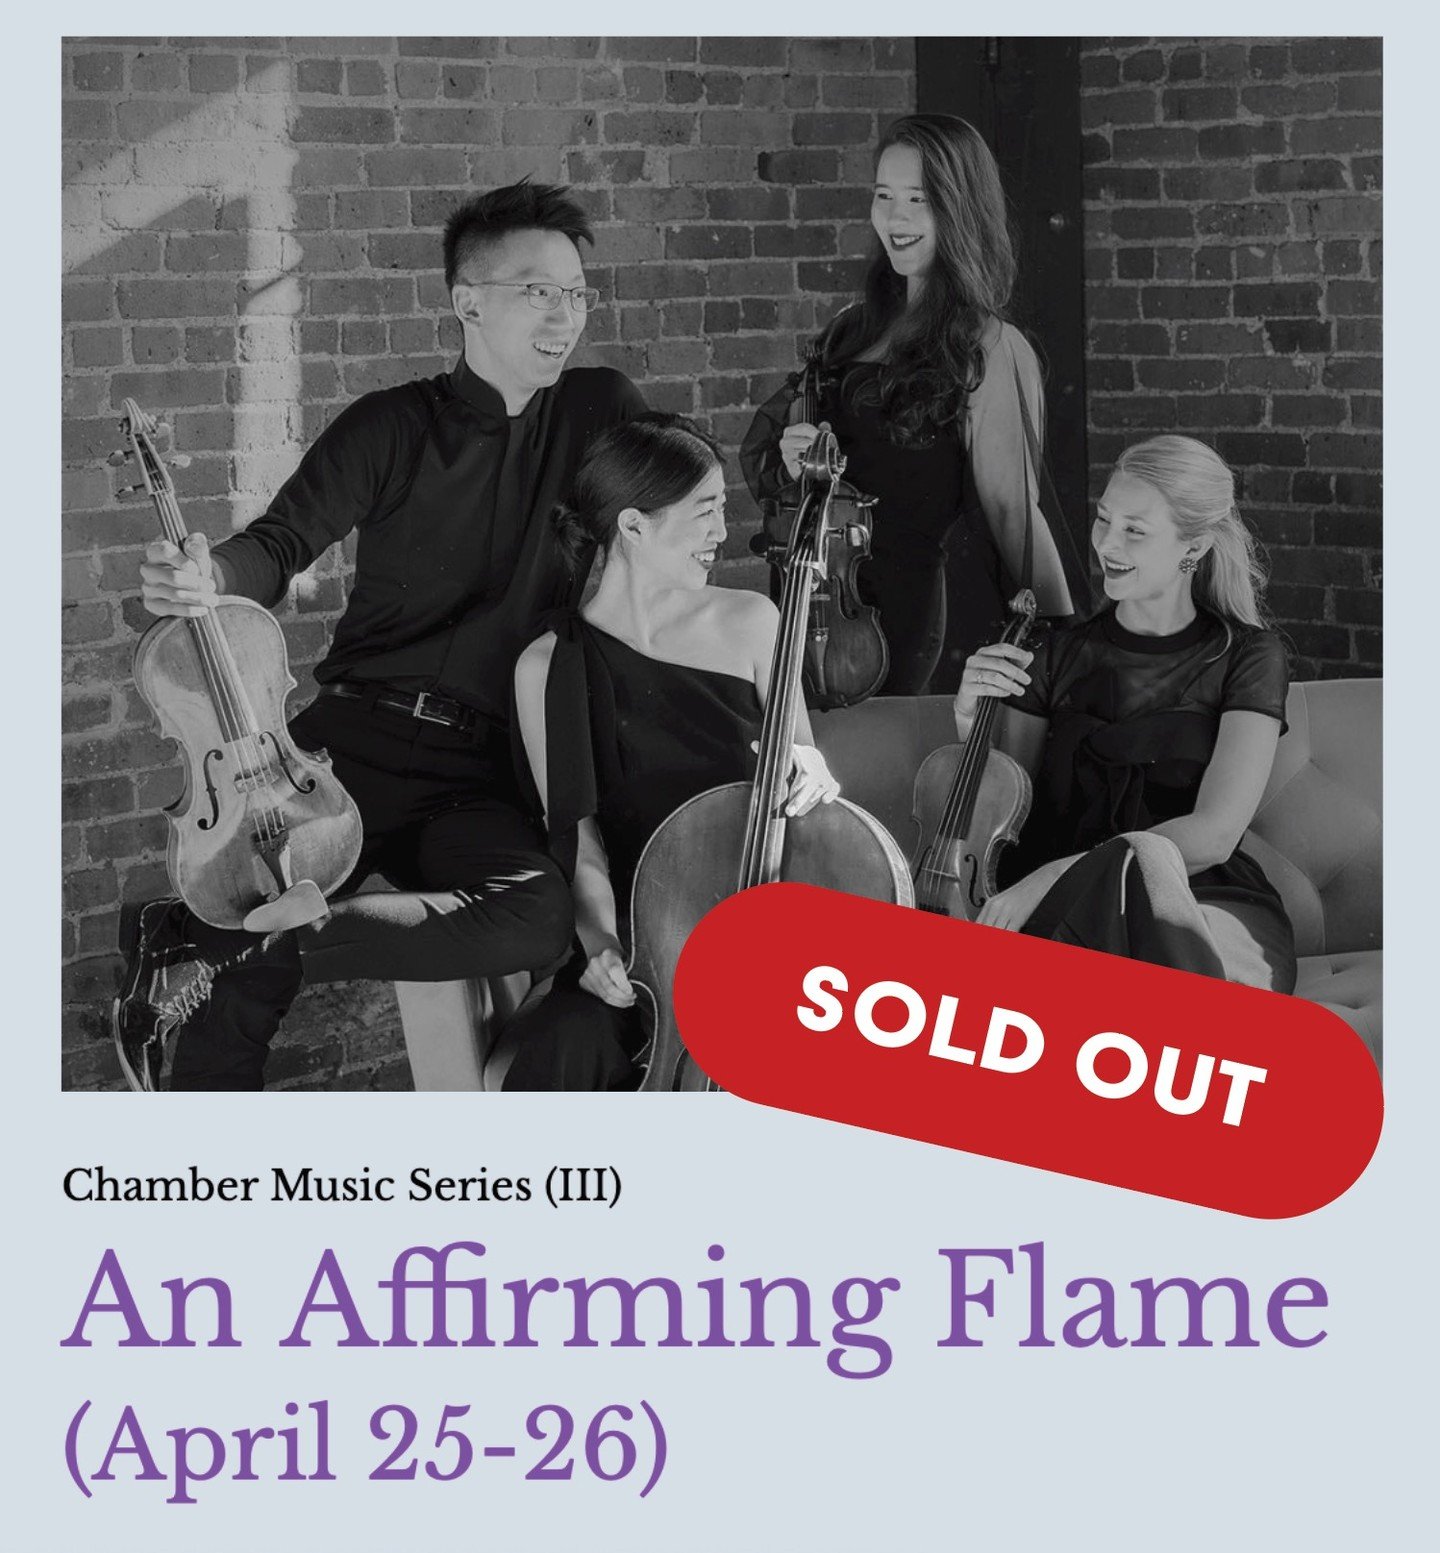 Both nights of this concert at @nypl_lpa and @fortlee.musichall are now SOLD OUT! 
Experience the exquisite @terrastringquartet as they perform Britten's evocative String Quartet No. 1, crafted during Britten's time in wartime New York, along with th